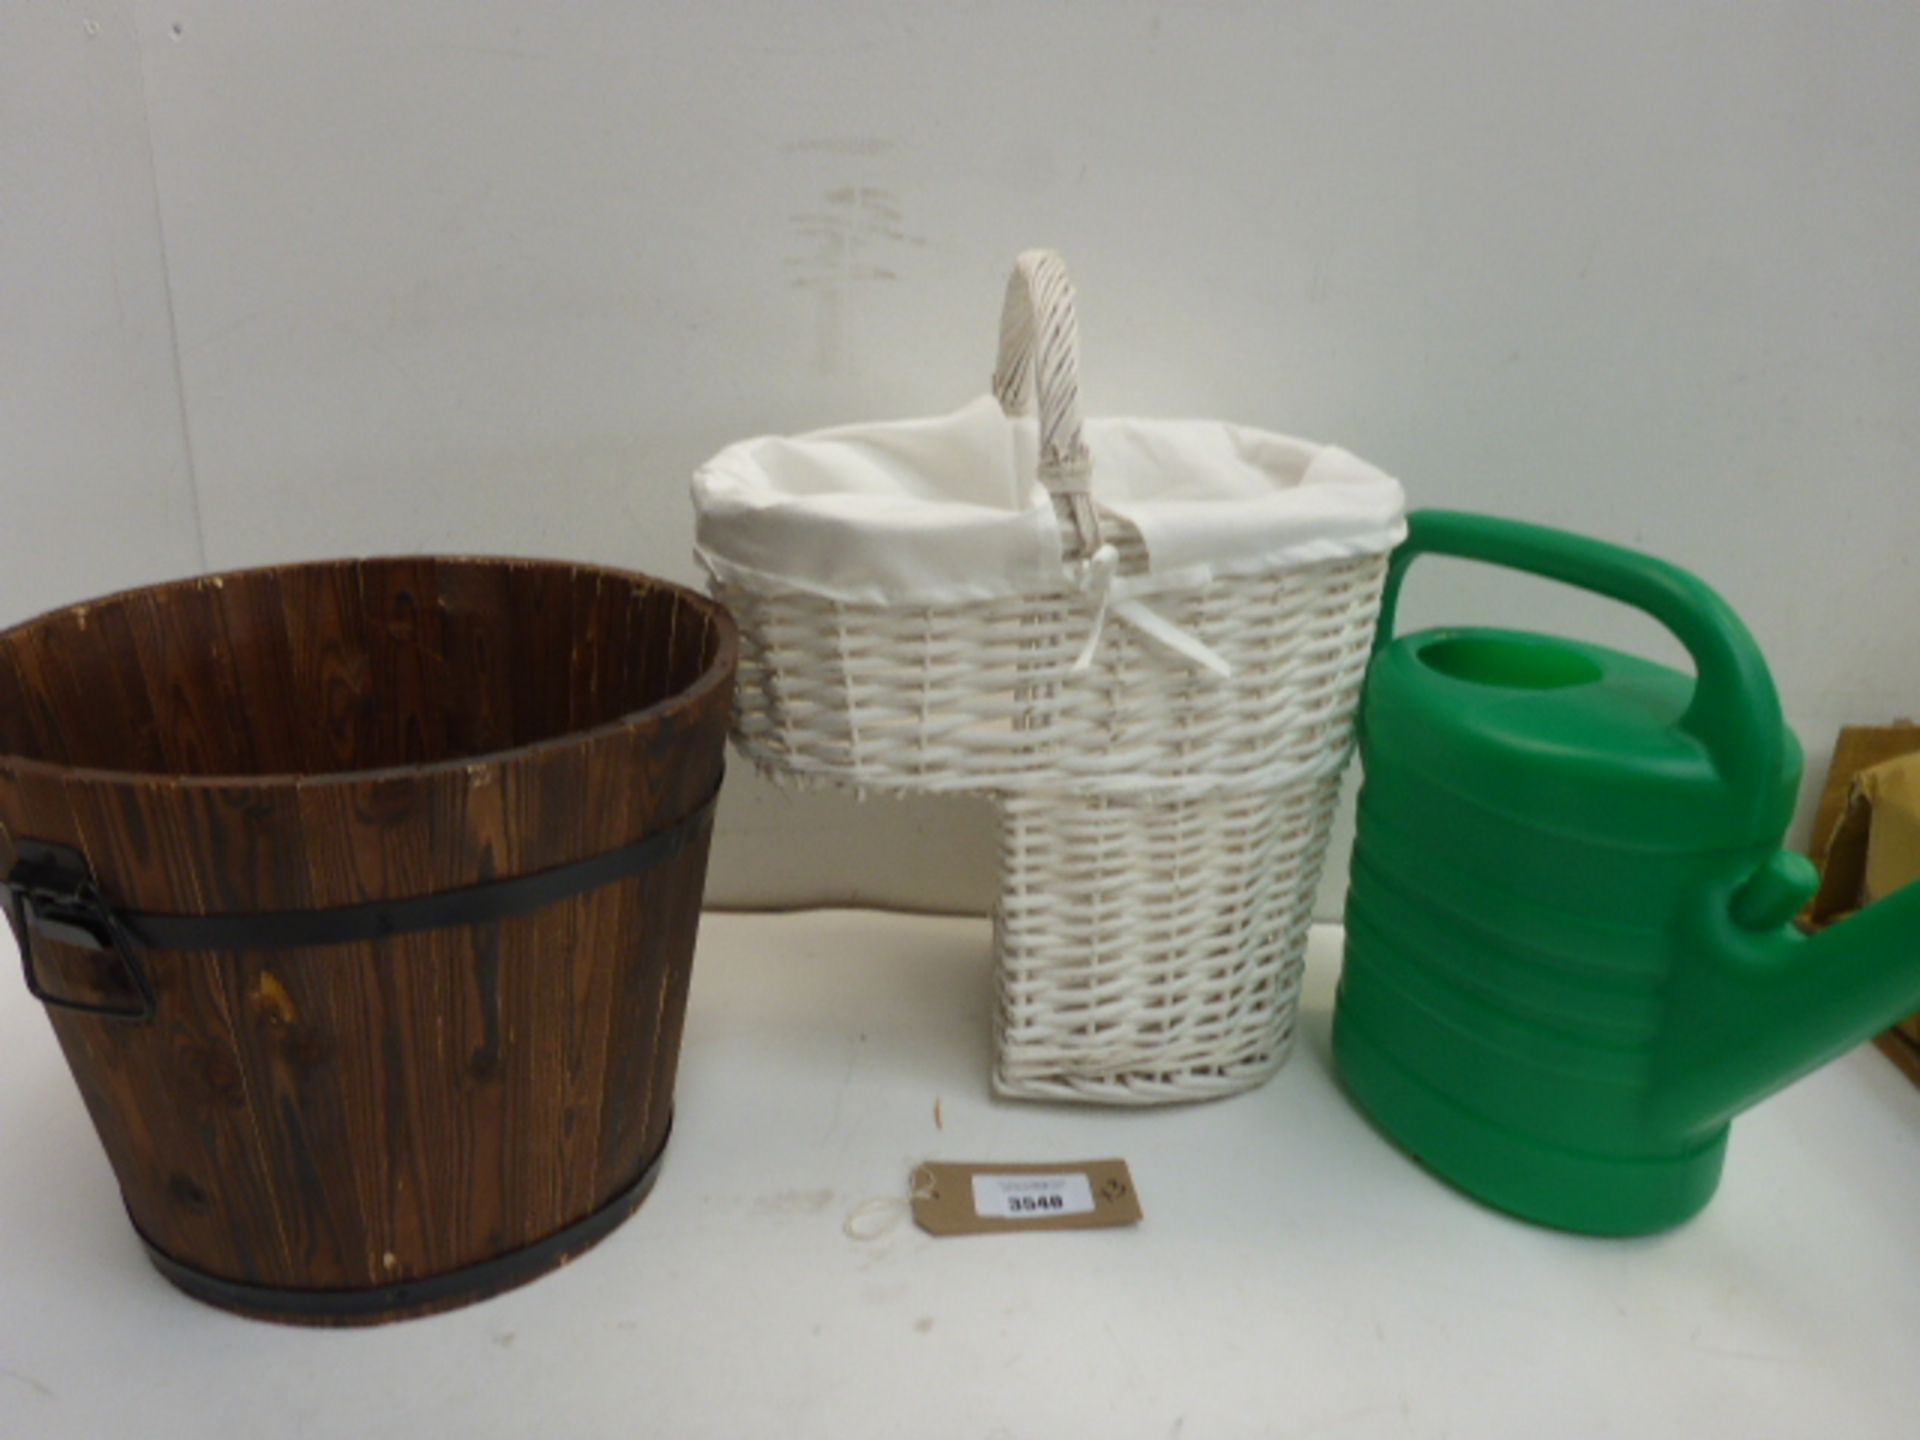 Wooden planter, watering can and wicker step basket